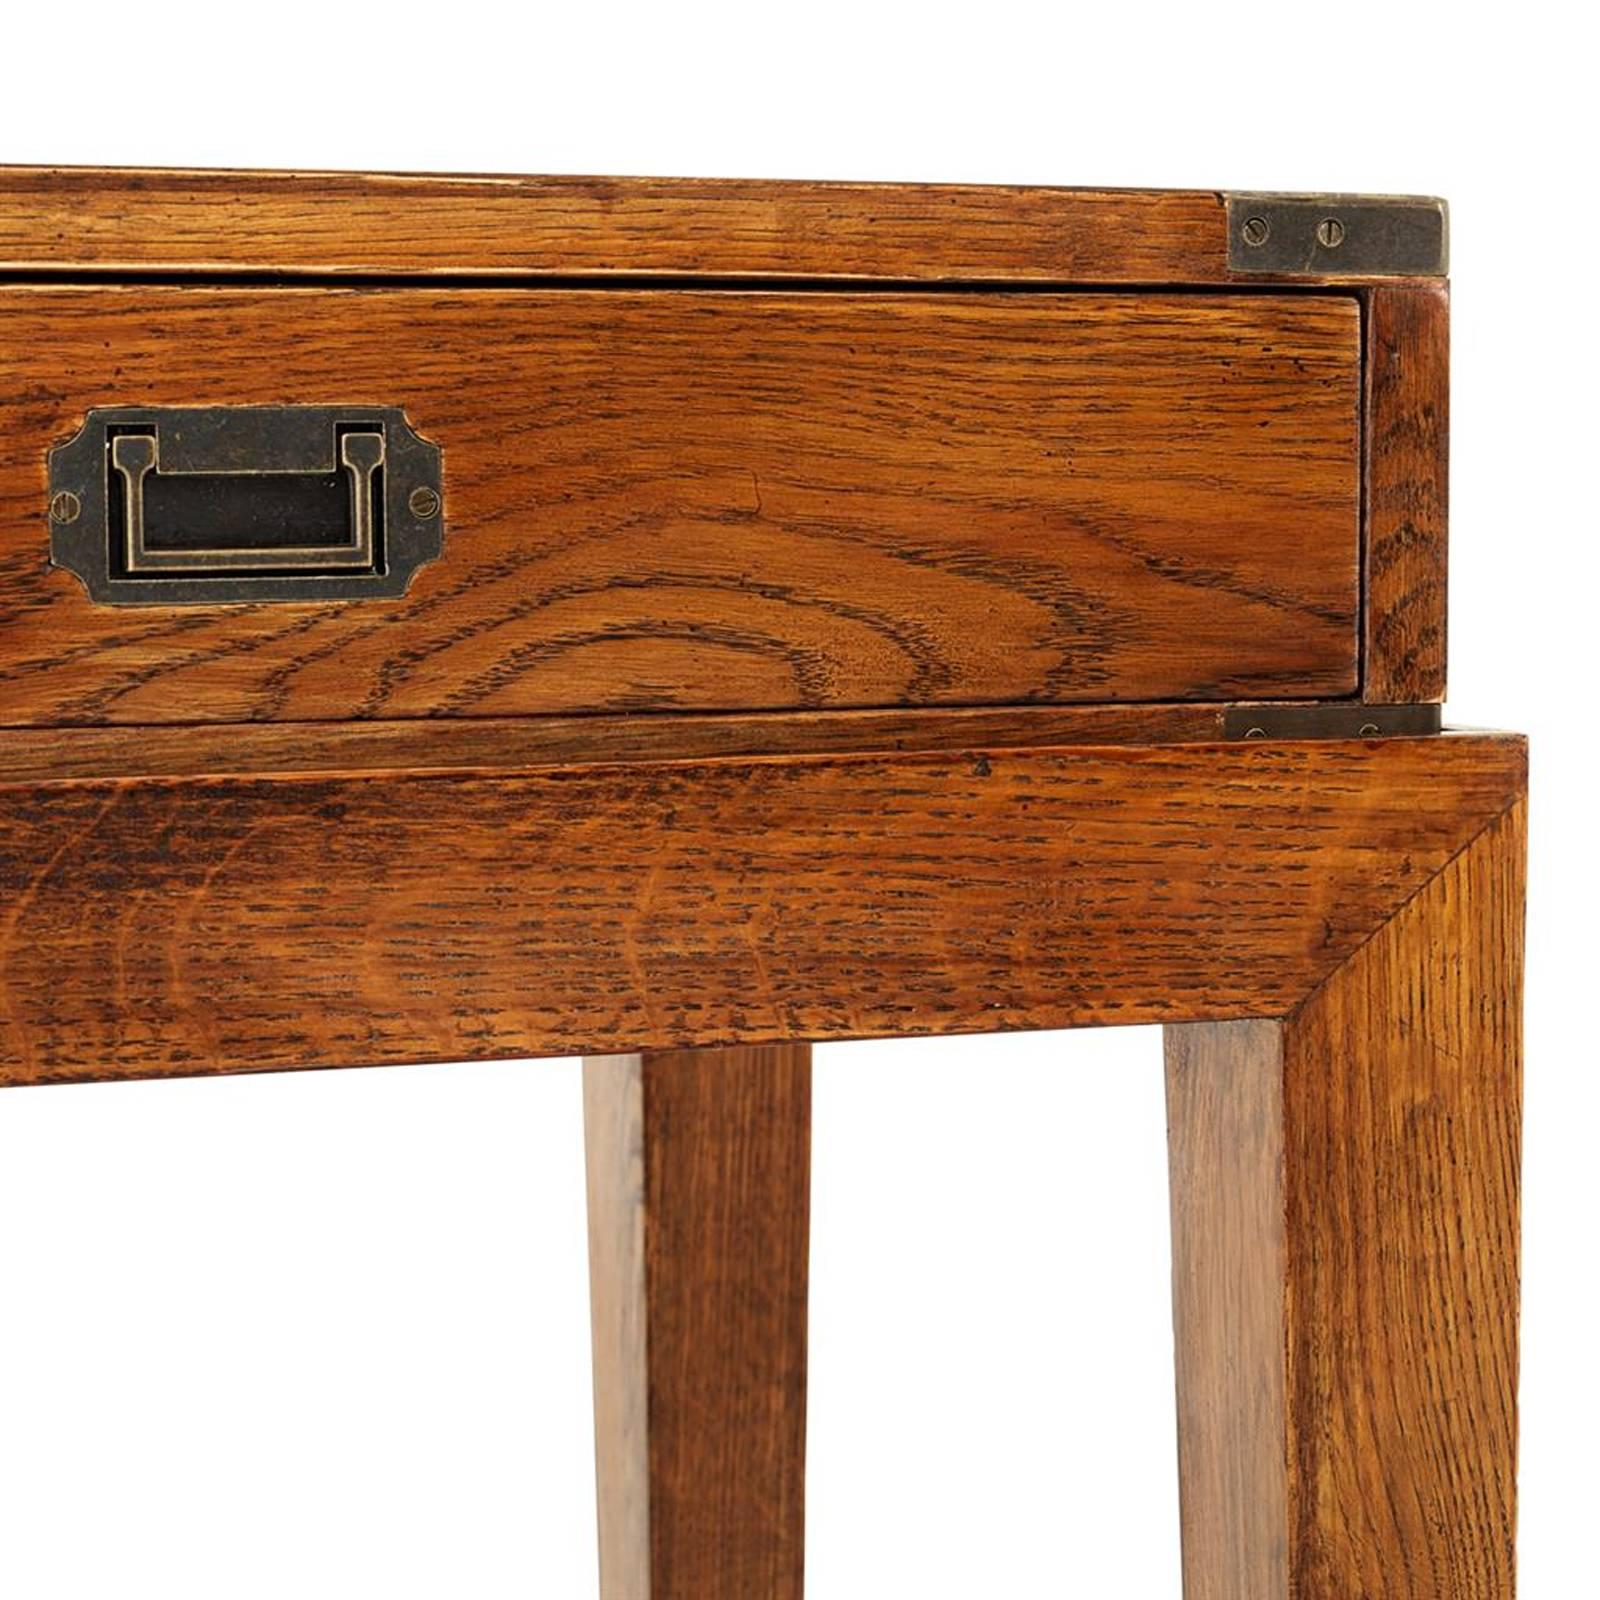 Polished GI Console Table in Antique Oak